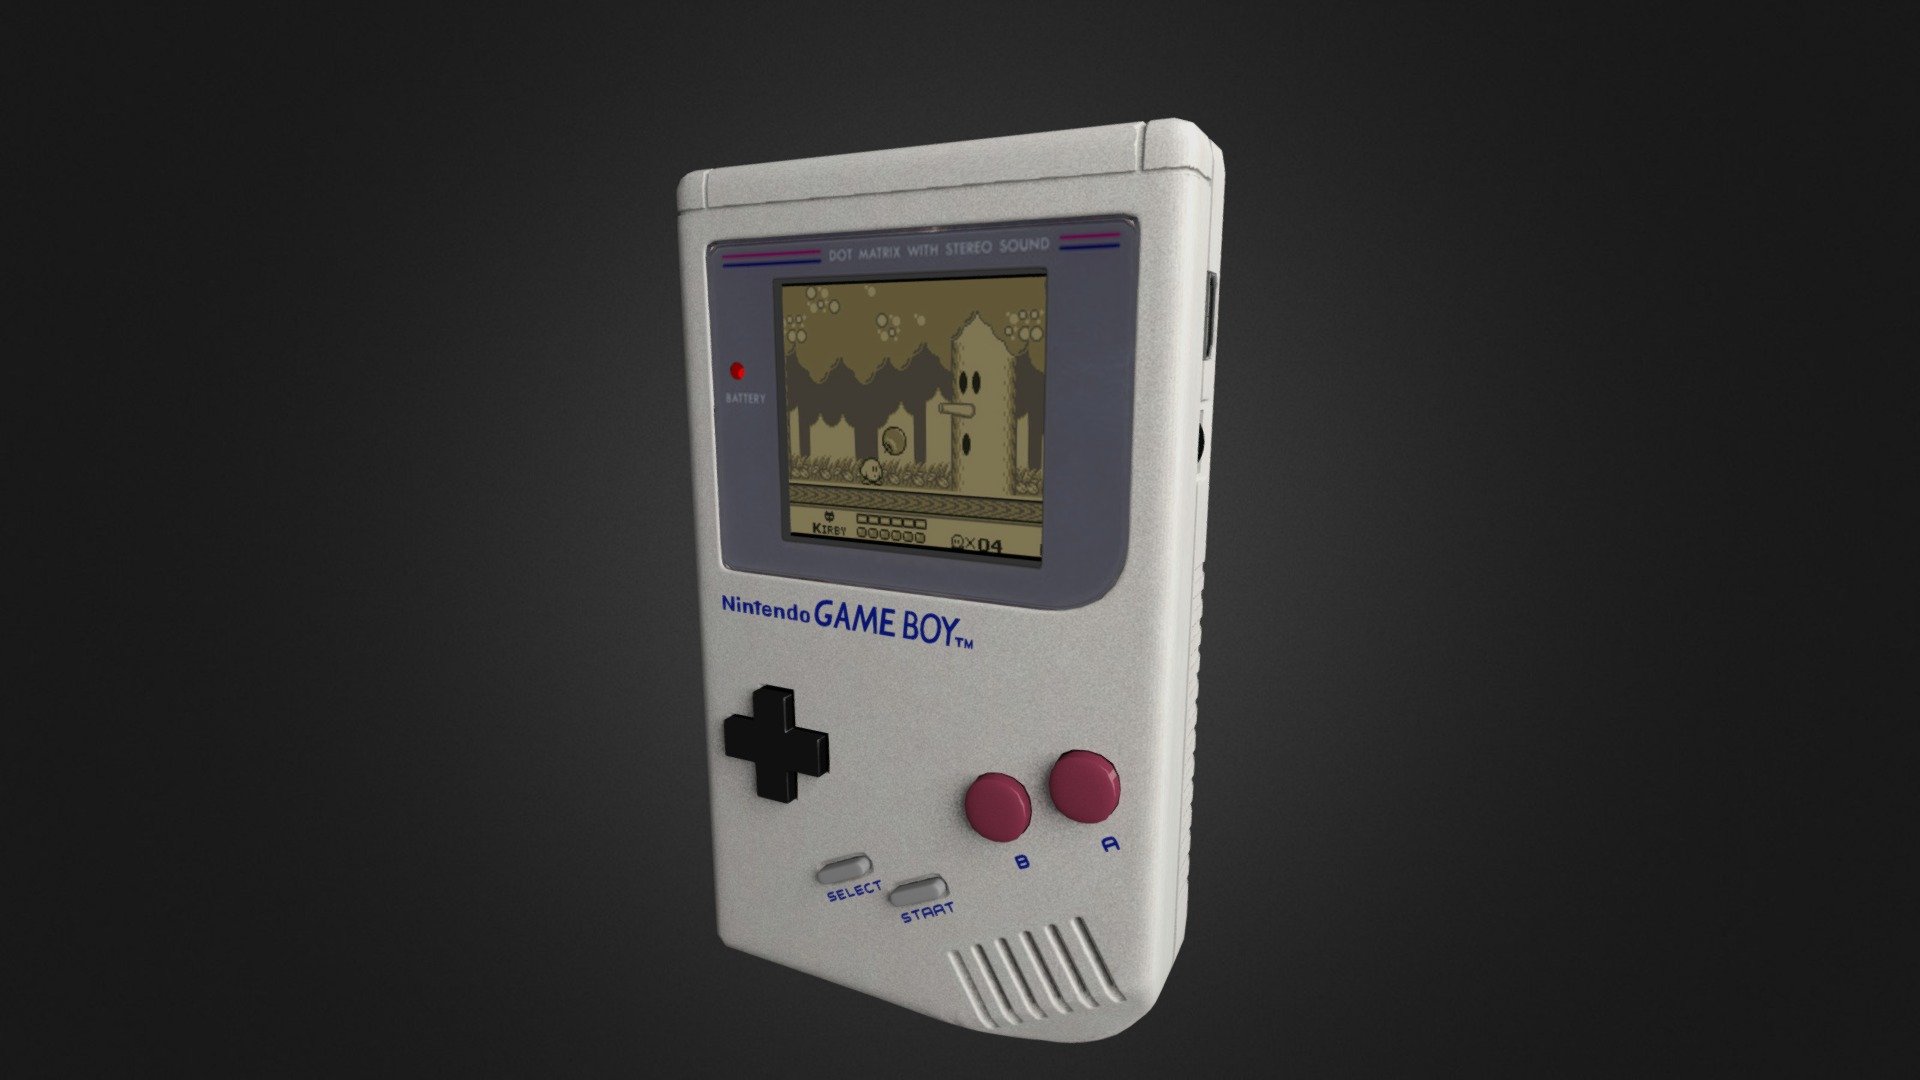 Modeled, textured, and baked in Blender

Full cycles scene:
www.AESmith.co/-/3d/gameboy.png

More at AlexanderESmith.com

Available for commissions - Original Gameboy (Cycles Bake) - 3D model by Alexander E Smith (@alexanderesmith) 3d model